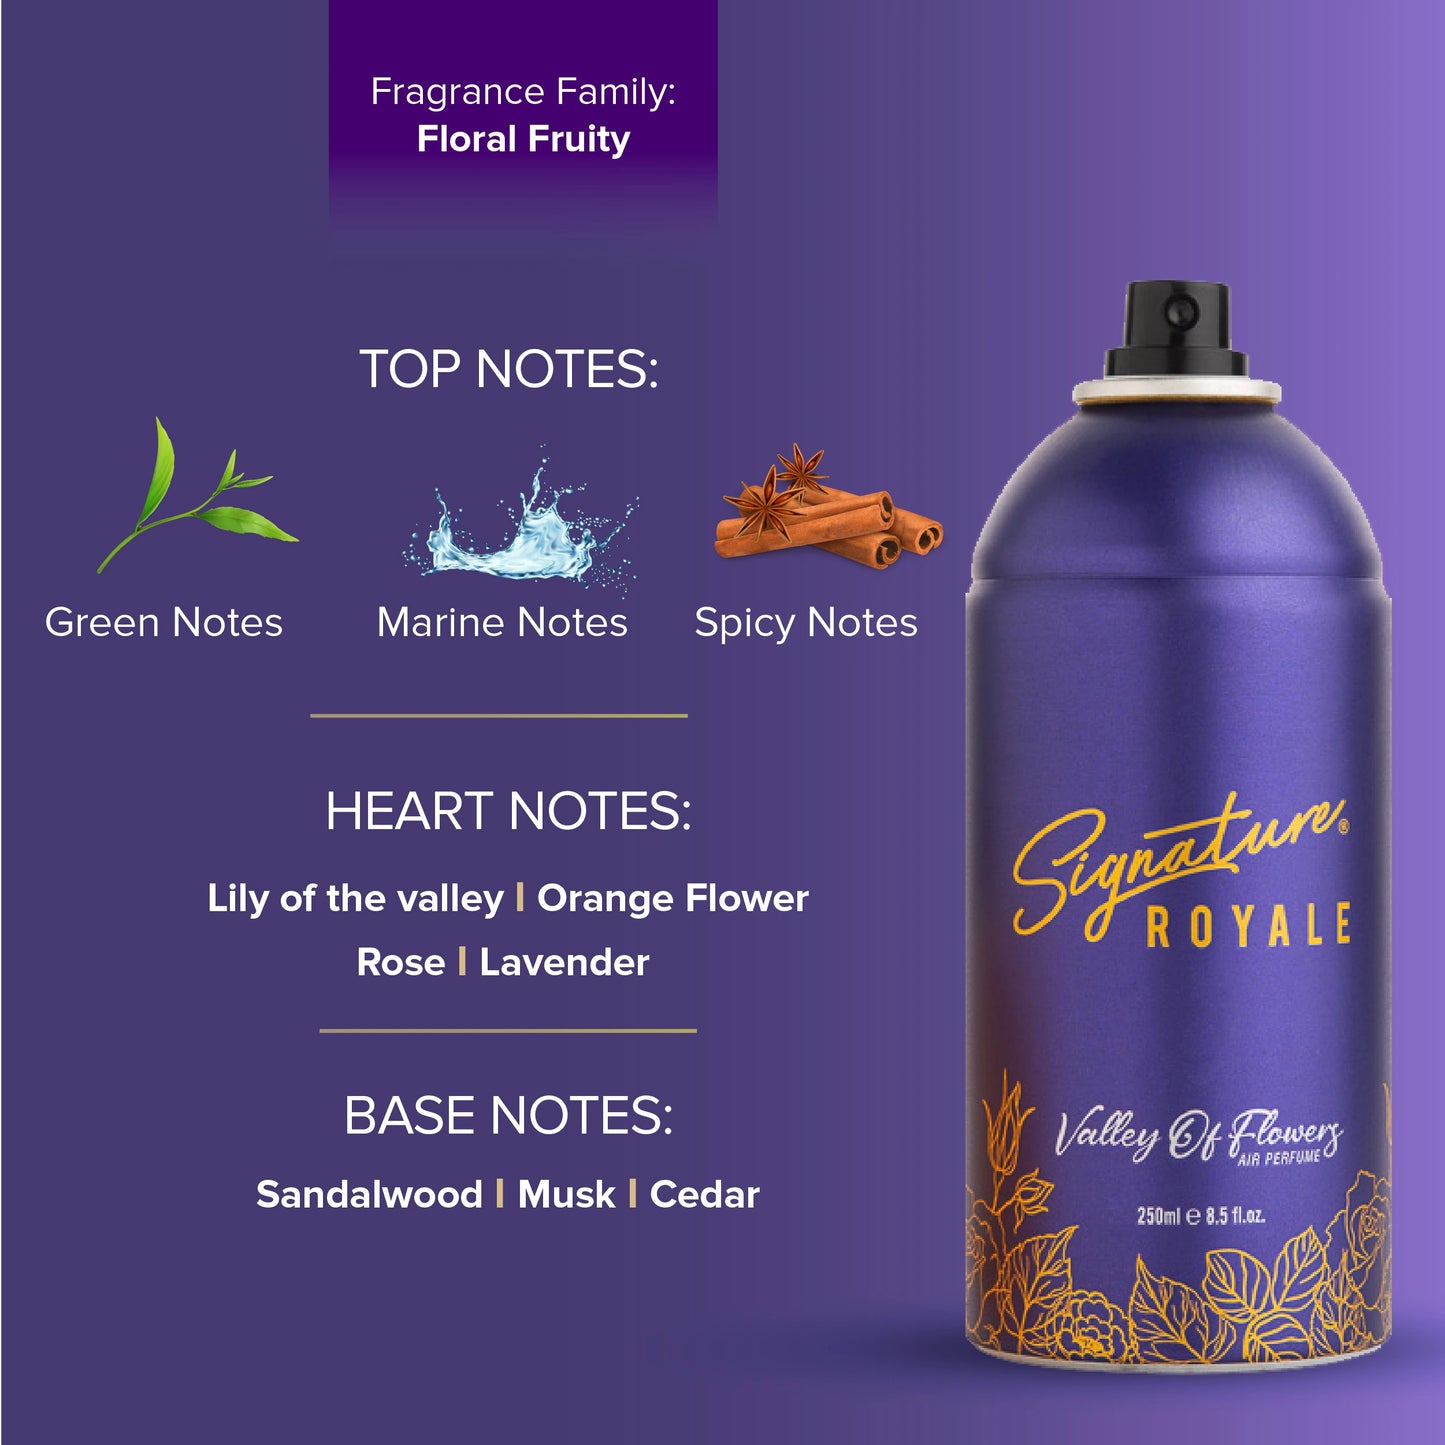 Signature Royale Valley of Flowers Air Perfume